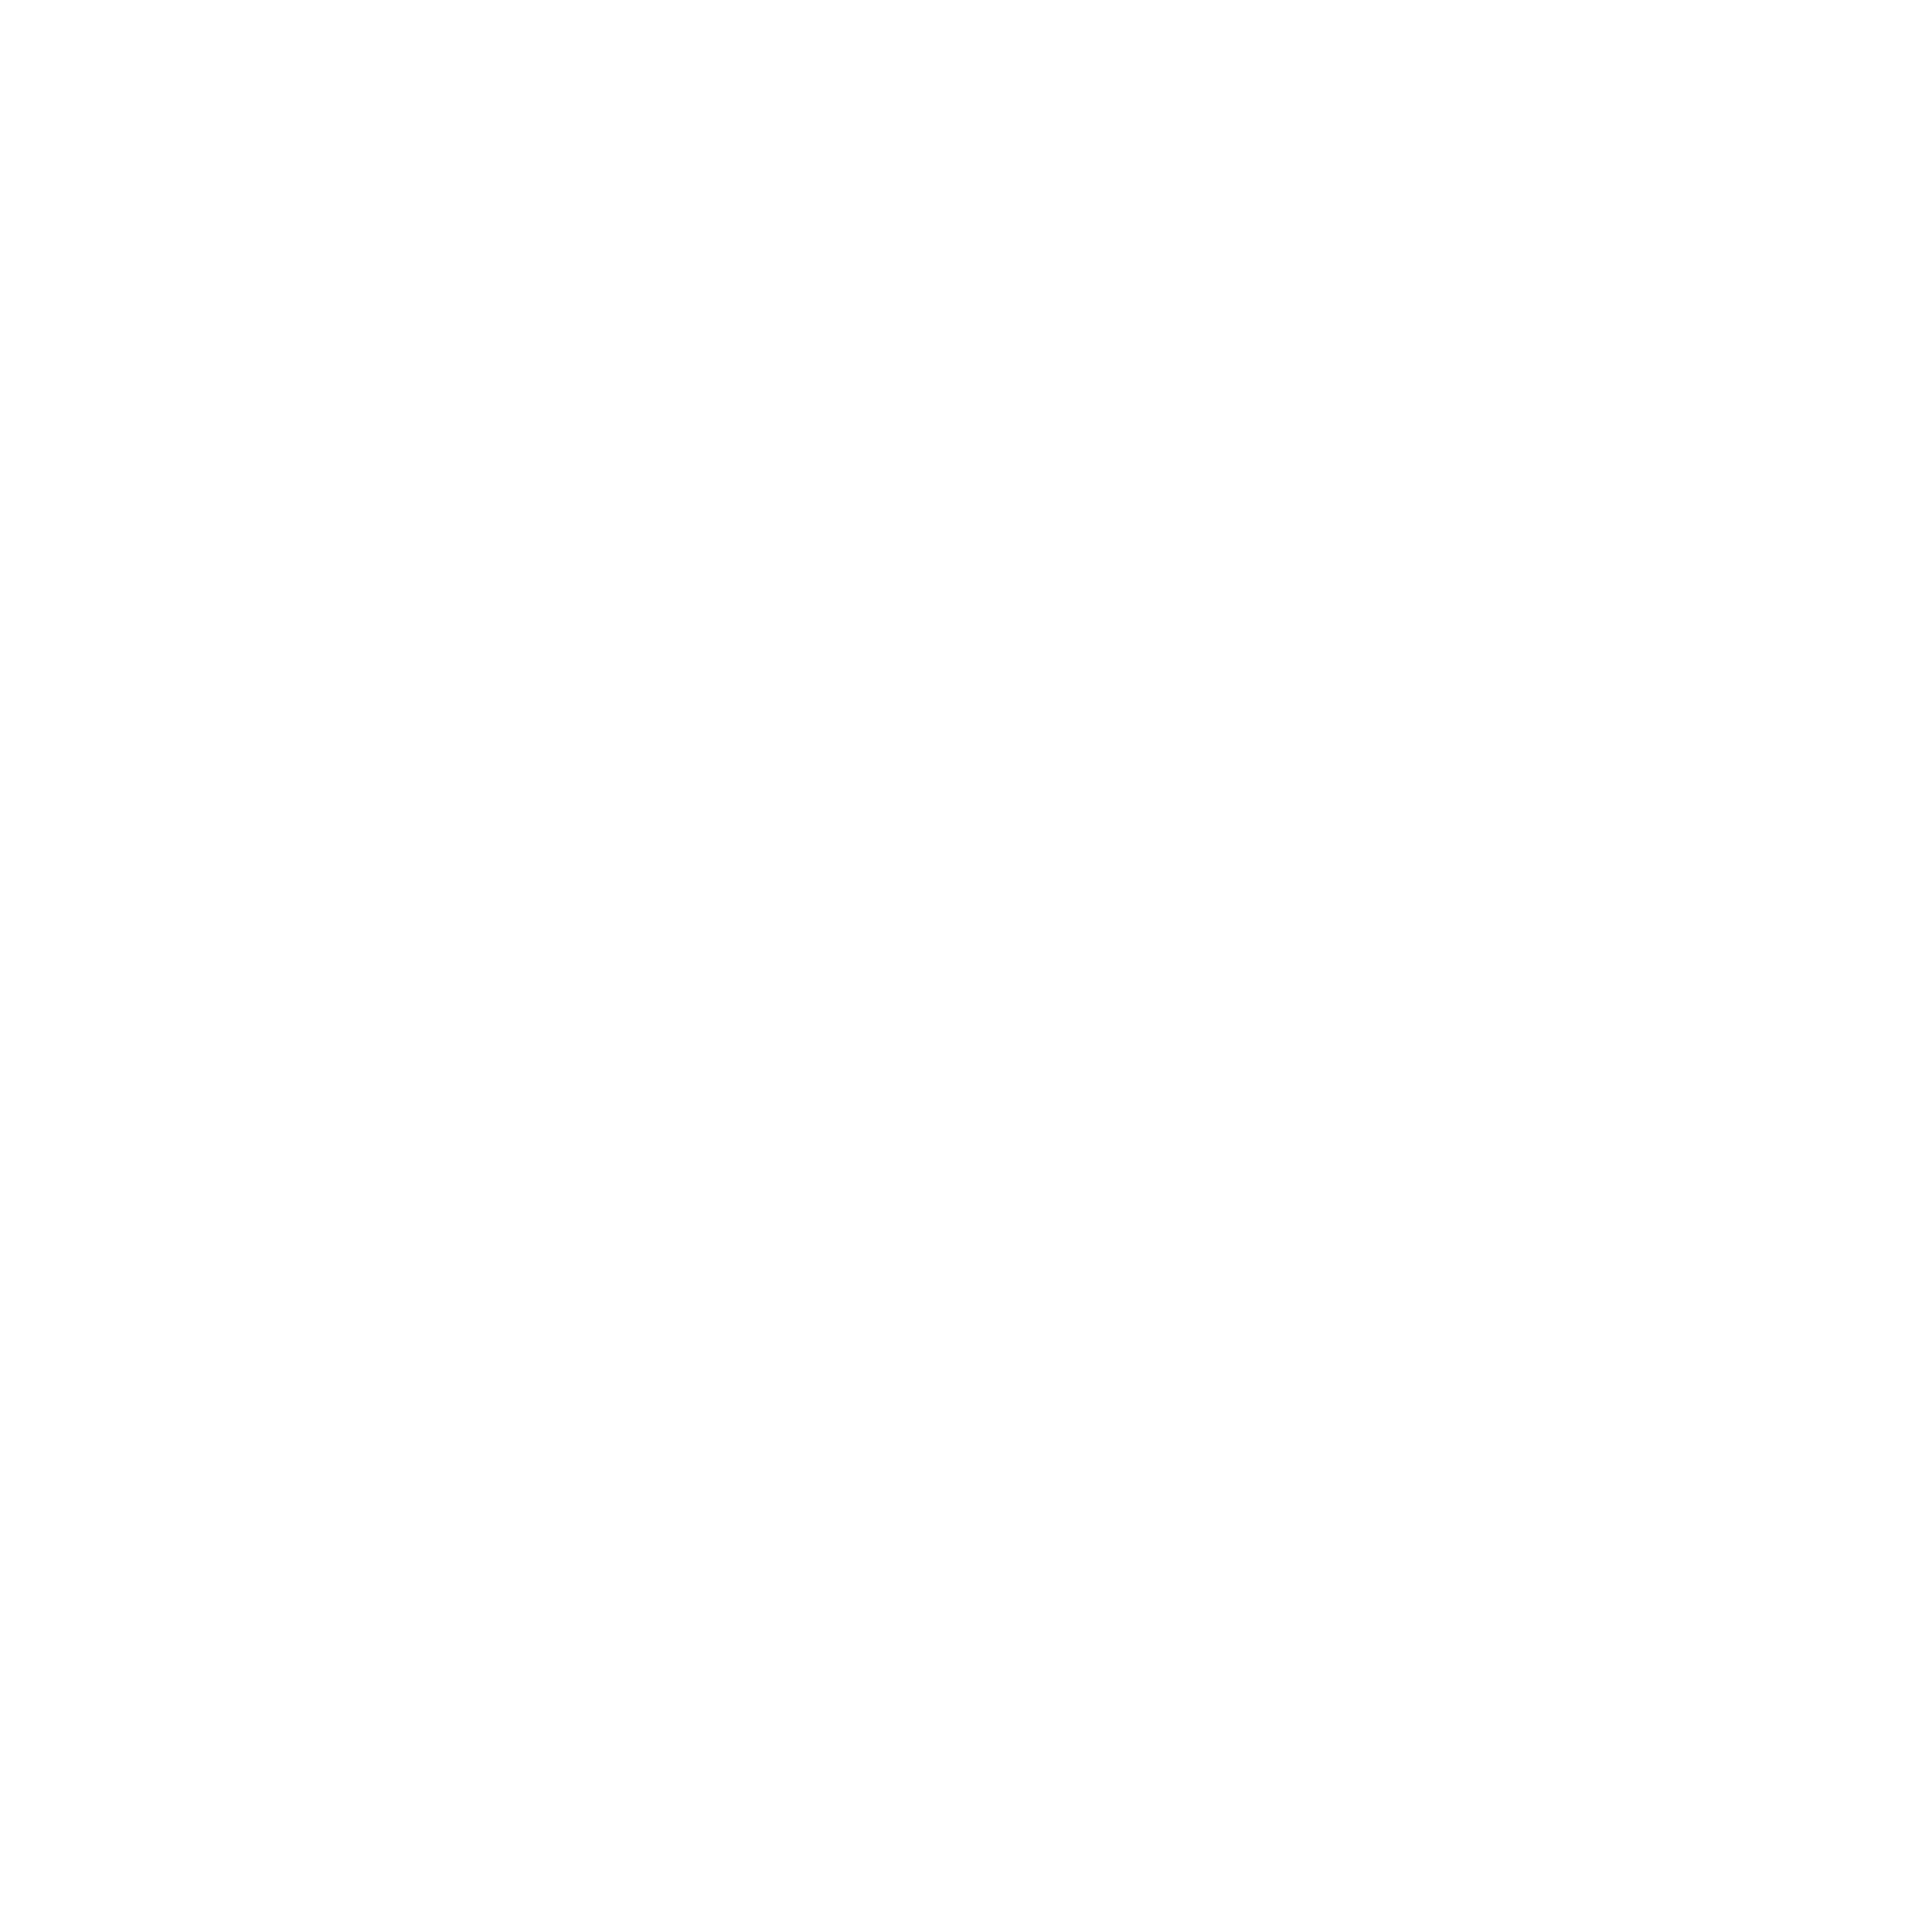 people/heart icon